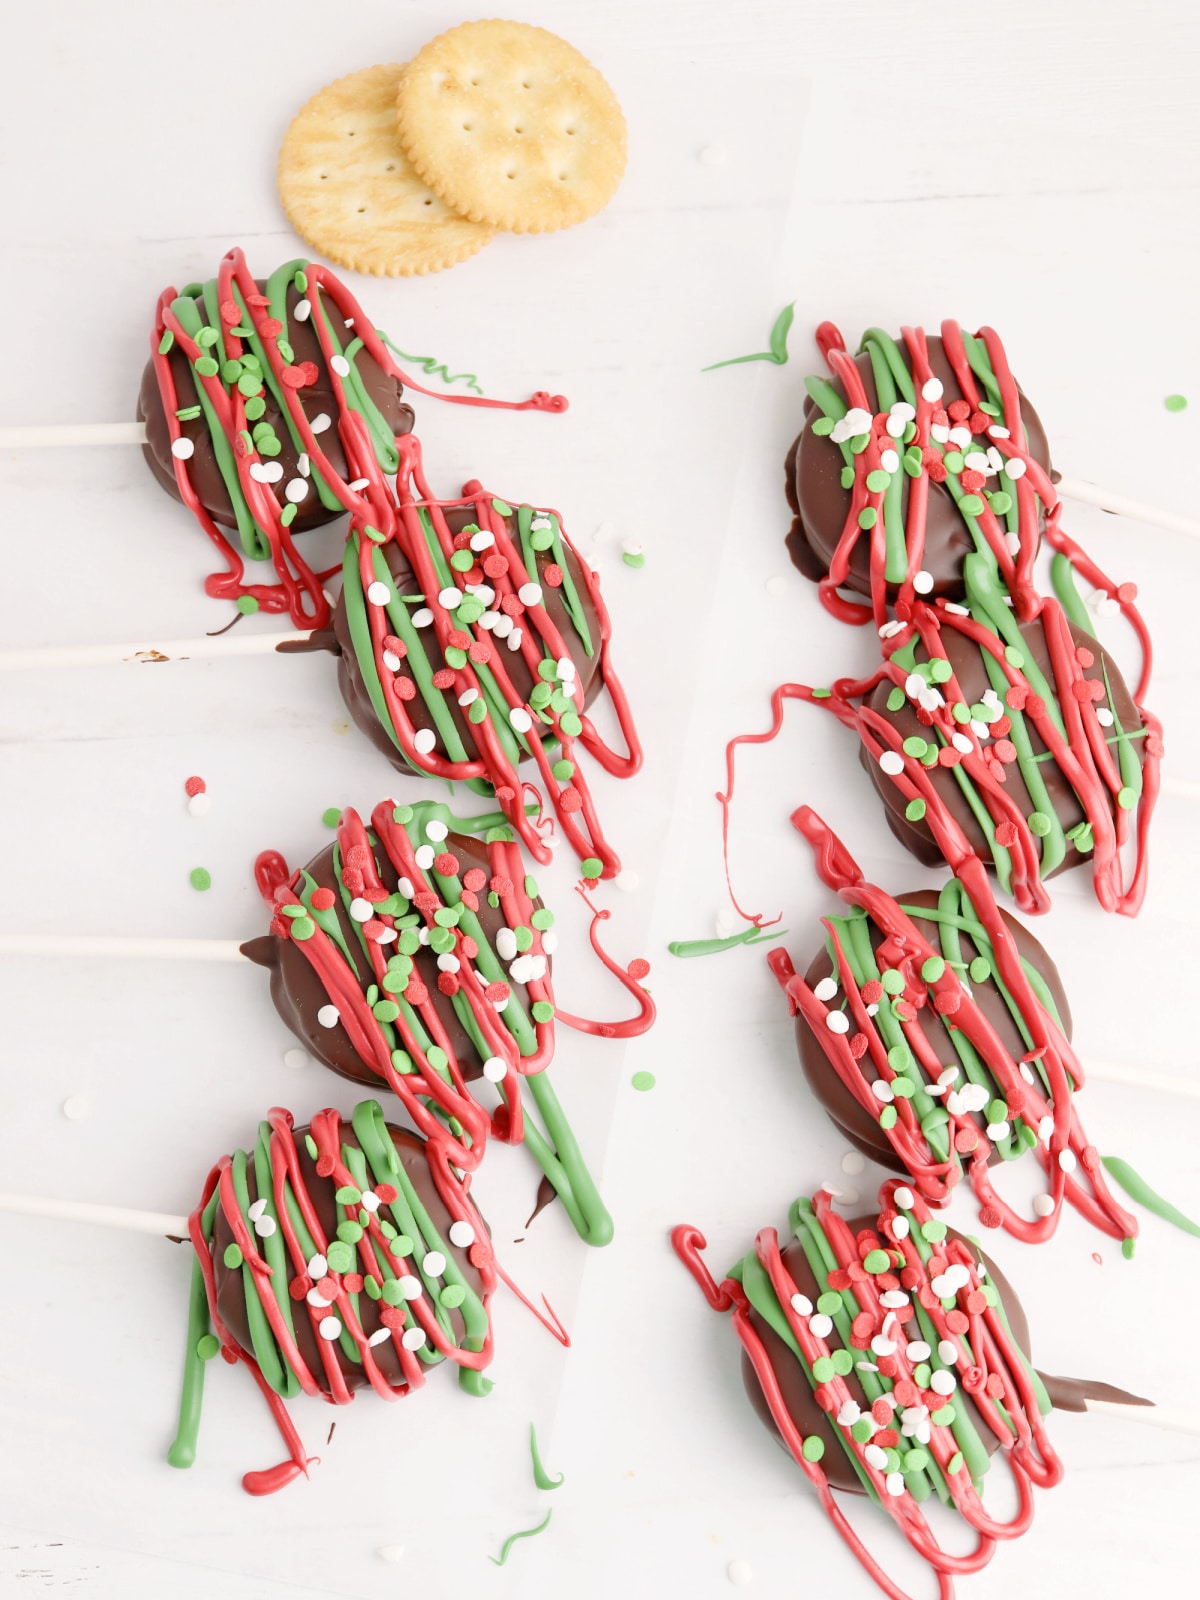 drizzle with red and green melted chocolate and sprinkles